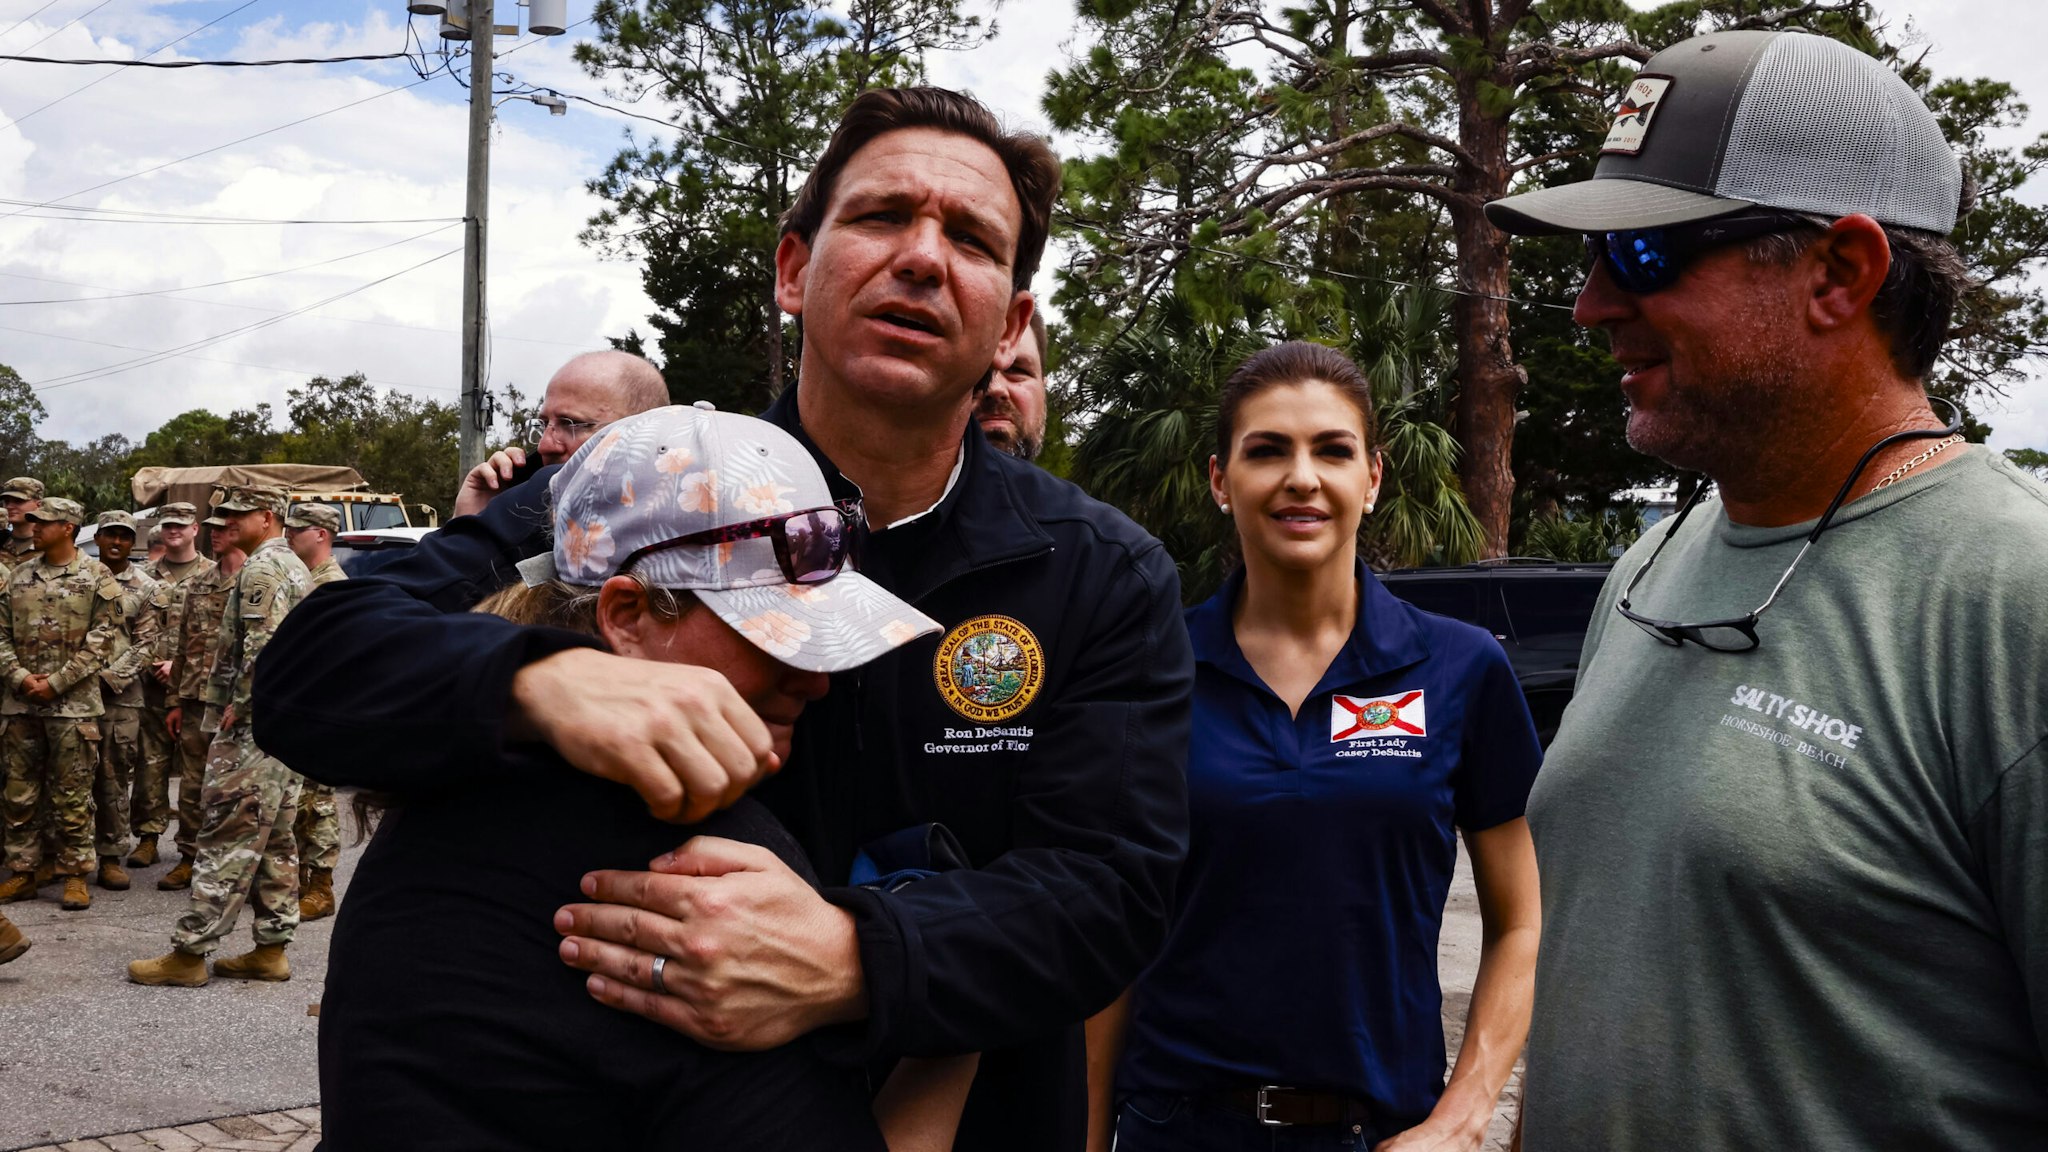 Ron DeSantis, governor of Florida and 2024 Republican presidential candidate, center left, embraces a resident during a visit after Hurricane Idalia in Horseshoe Beach, Florida, US, on Thursday, Aug. 31, 2023. Florida has started to dig out from the aftermath of Idalia, which weakened to a tropical storm even as it brought heavy rain across Georgia and the Carolinas, caused billions of dollars in damage, left hundreds of flights grounded and thousands without power.